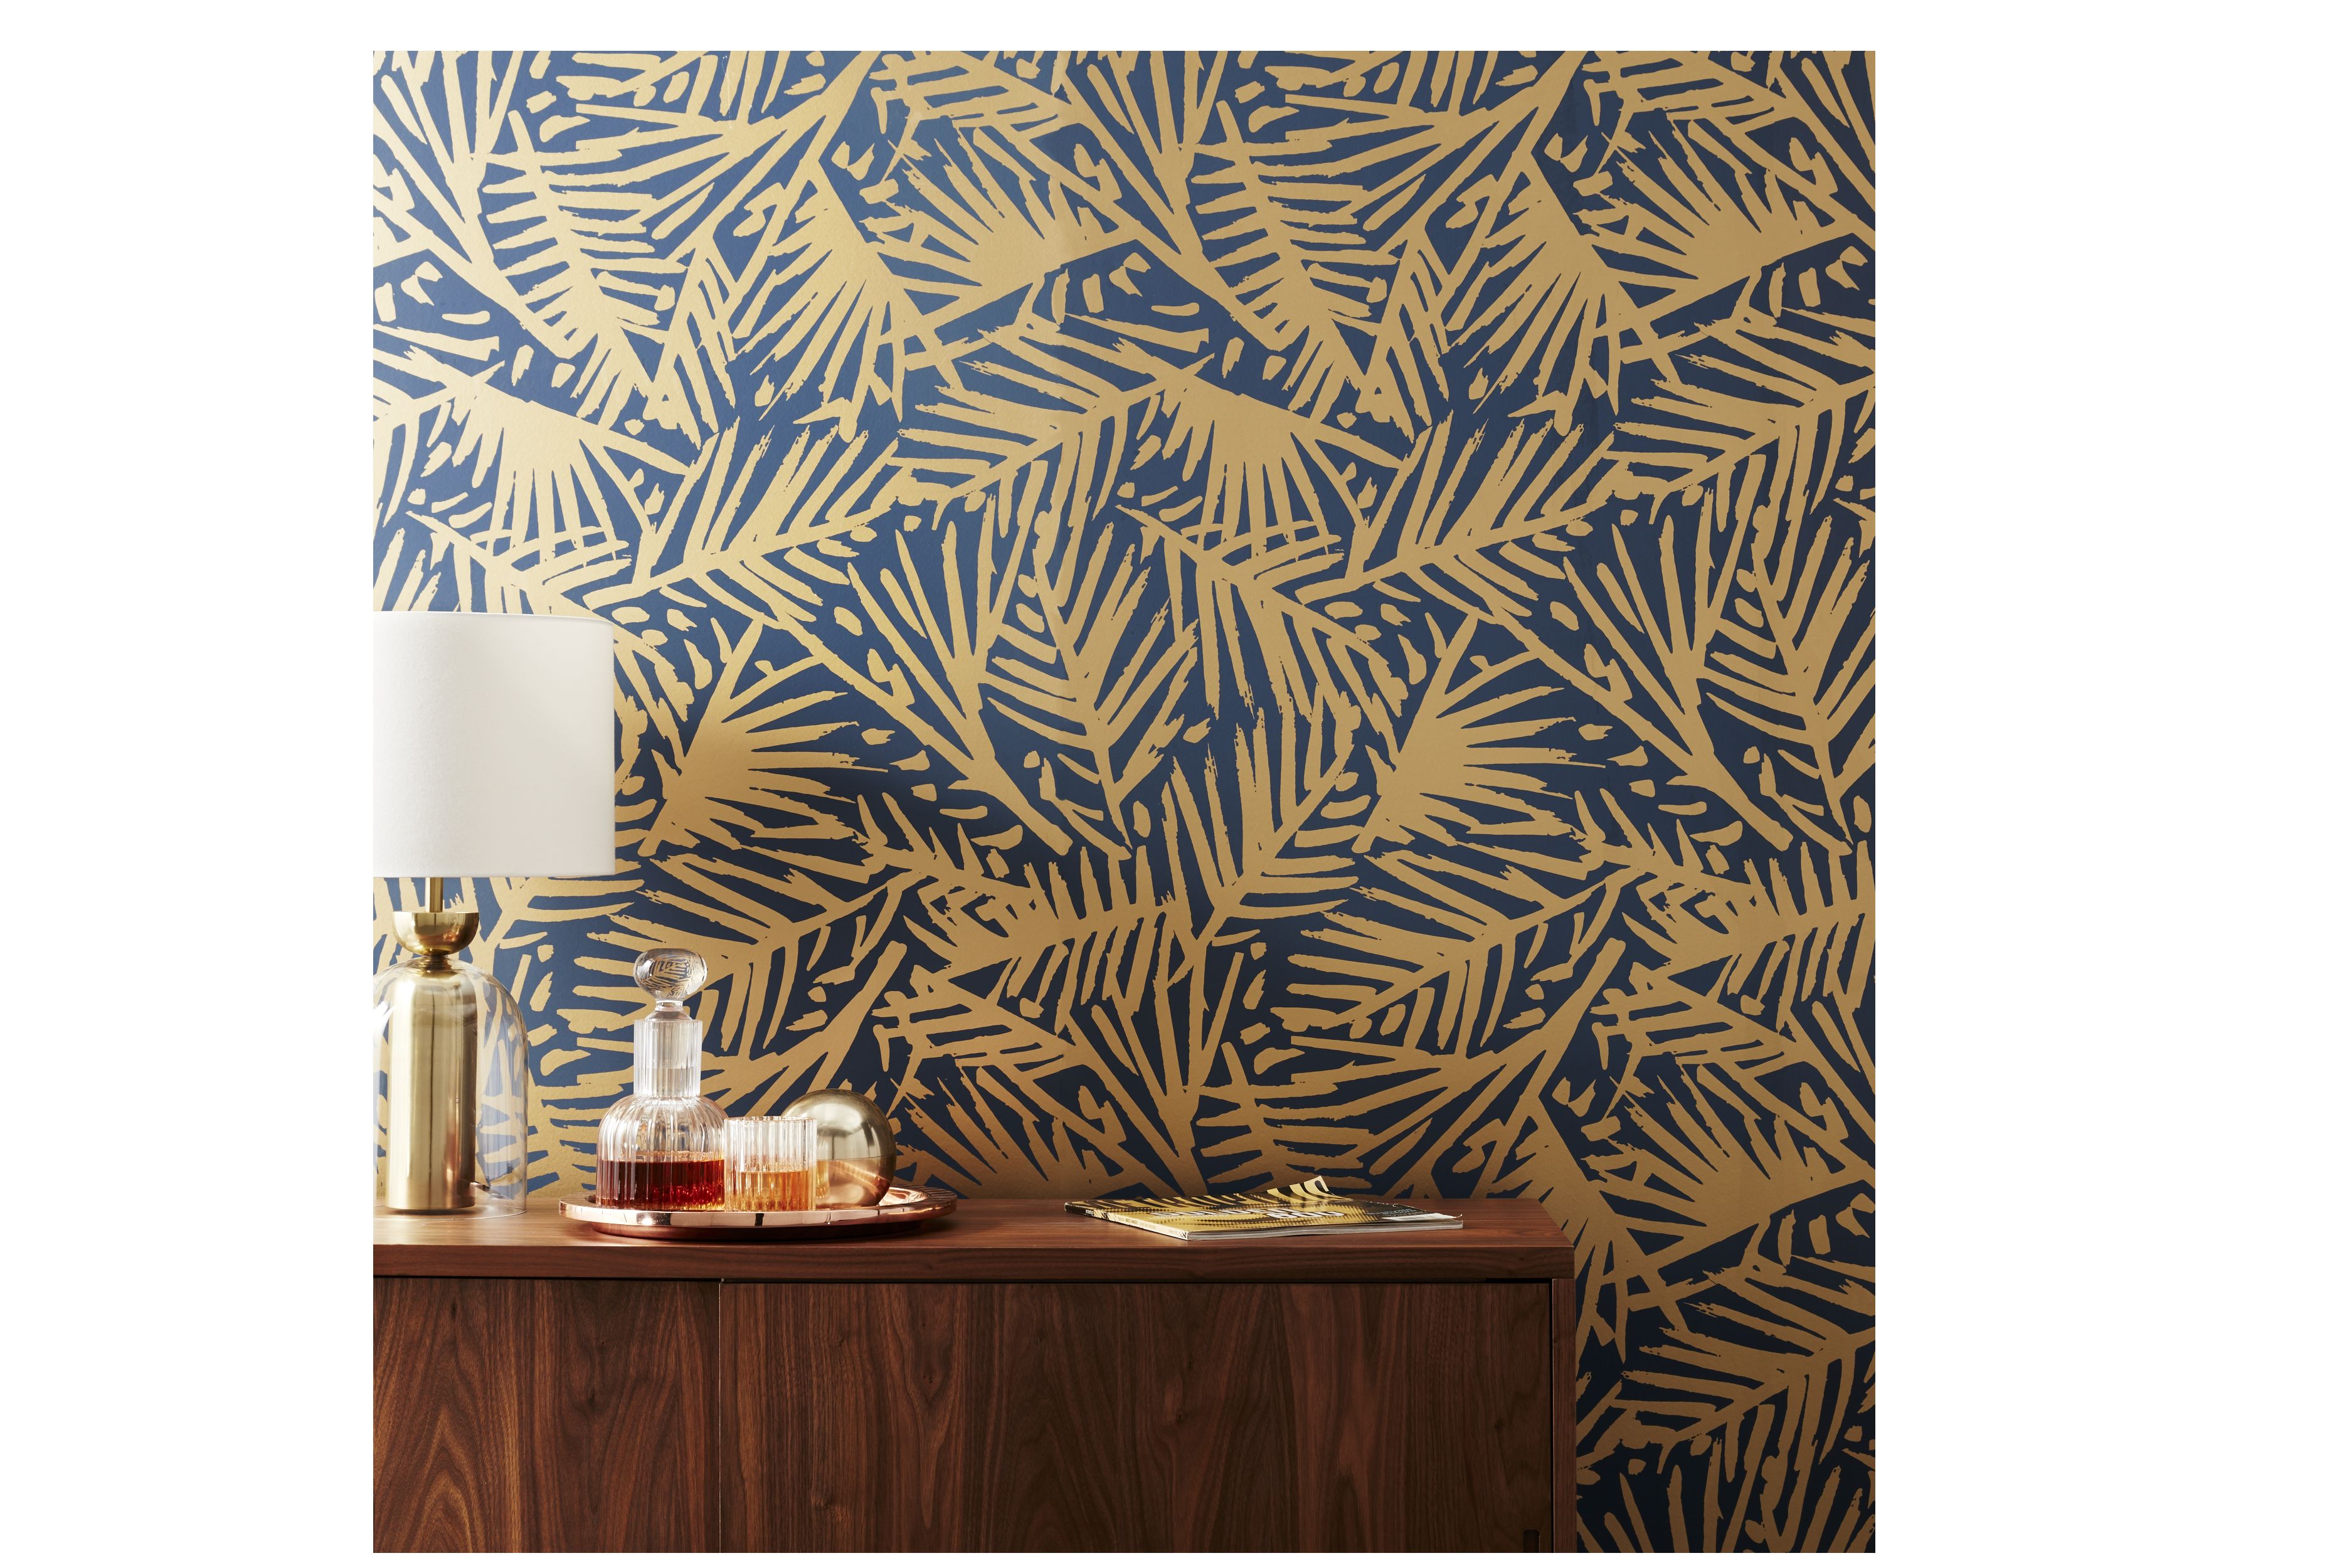 30 Statement Wallpapers  Patterned Wallpaper Designs